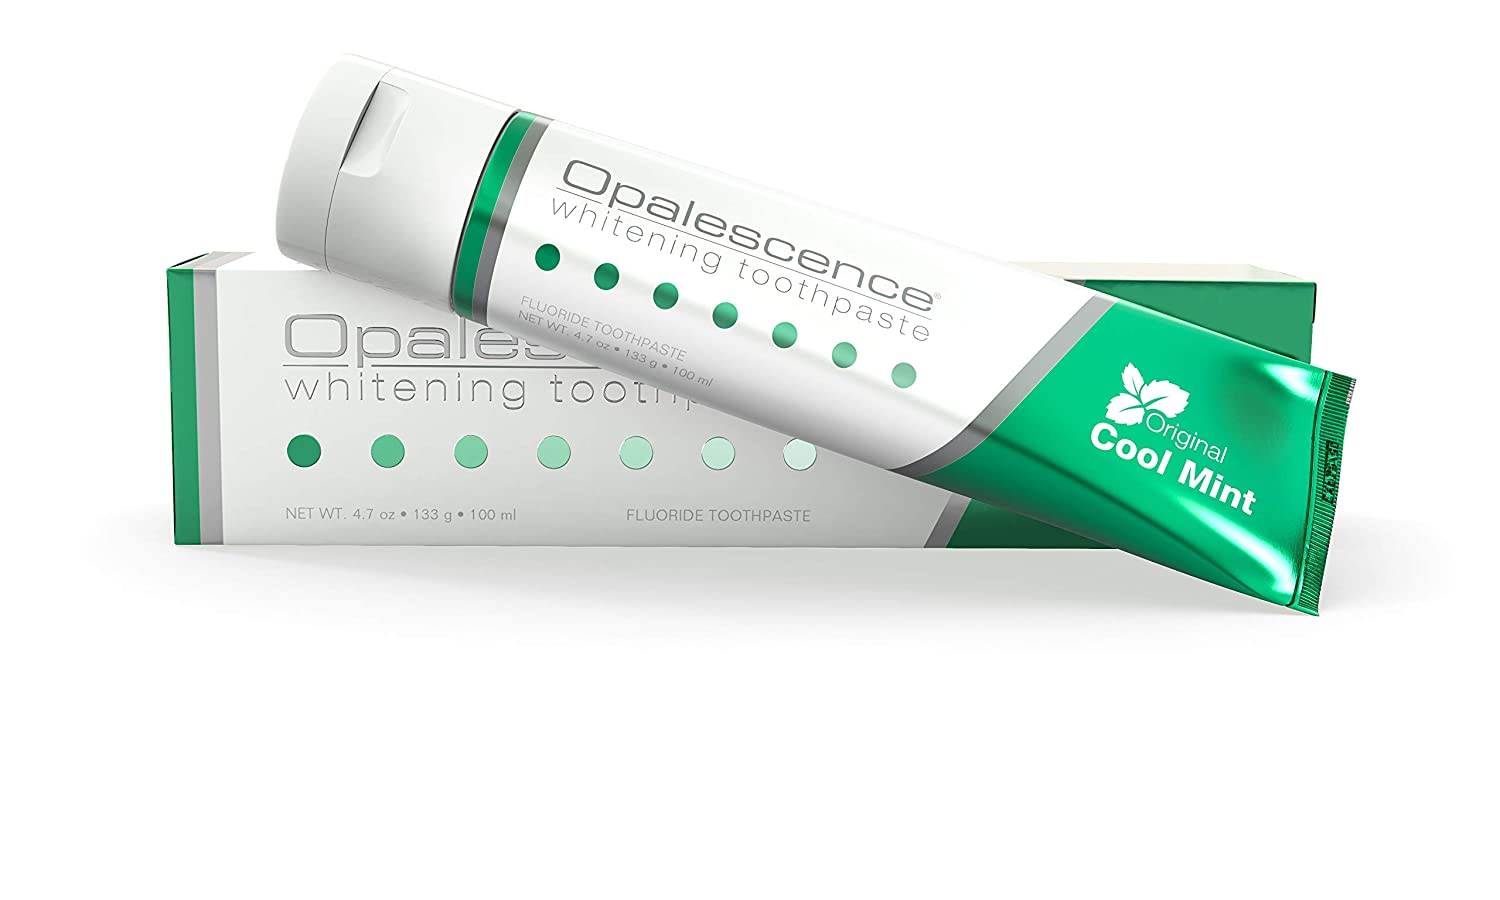 Opalescence Whitening Toothpaste 133g (12本）